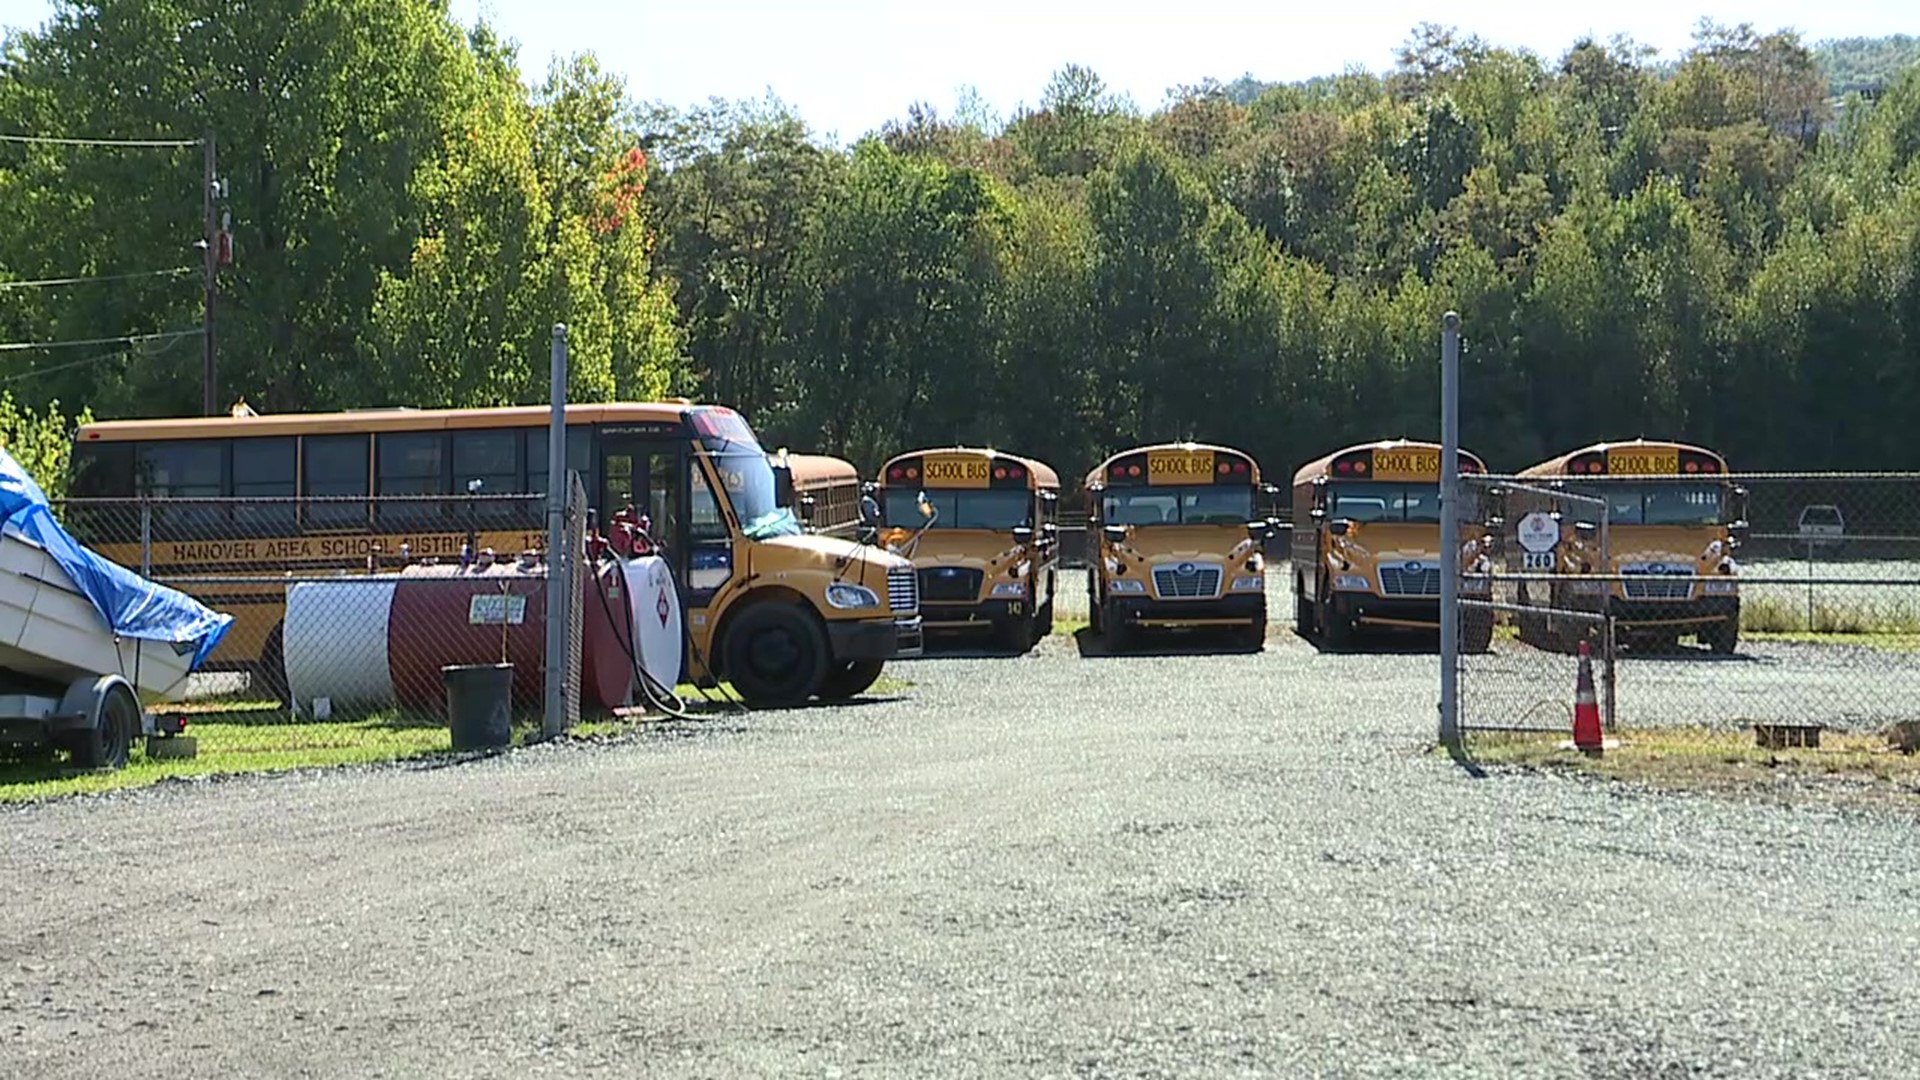 The Hanover Township zoning board voted 3 to 2 to allow a bus company to set up a parking lot.